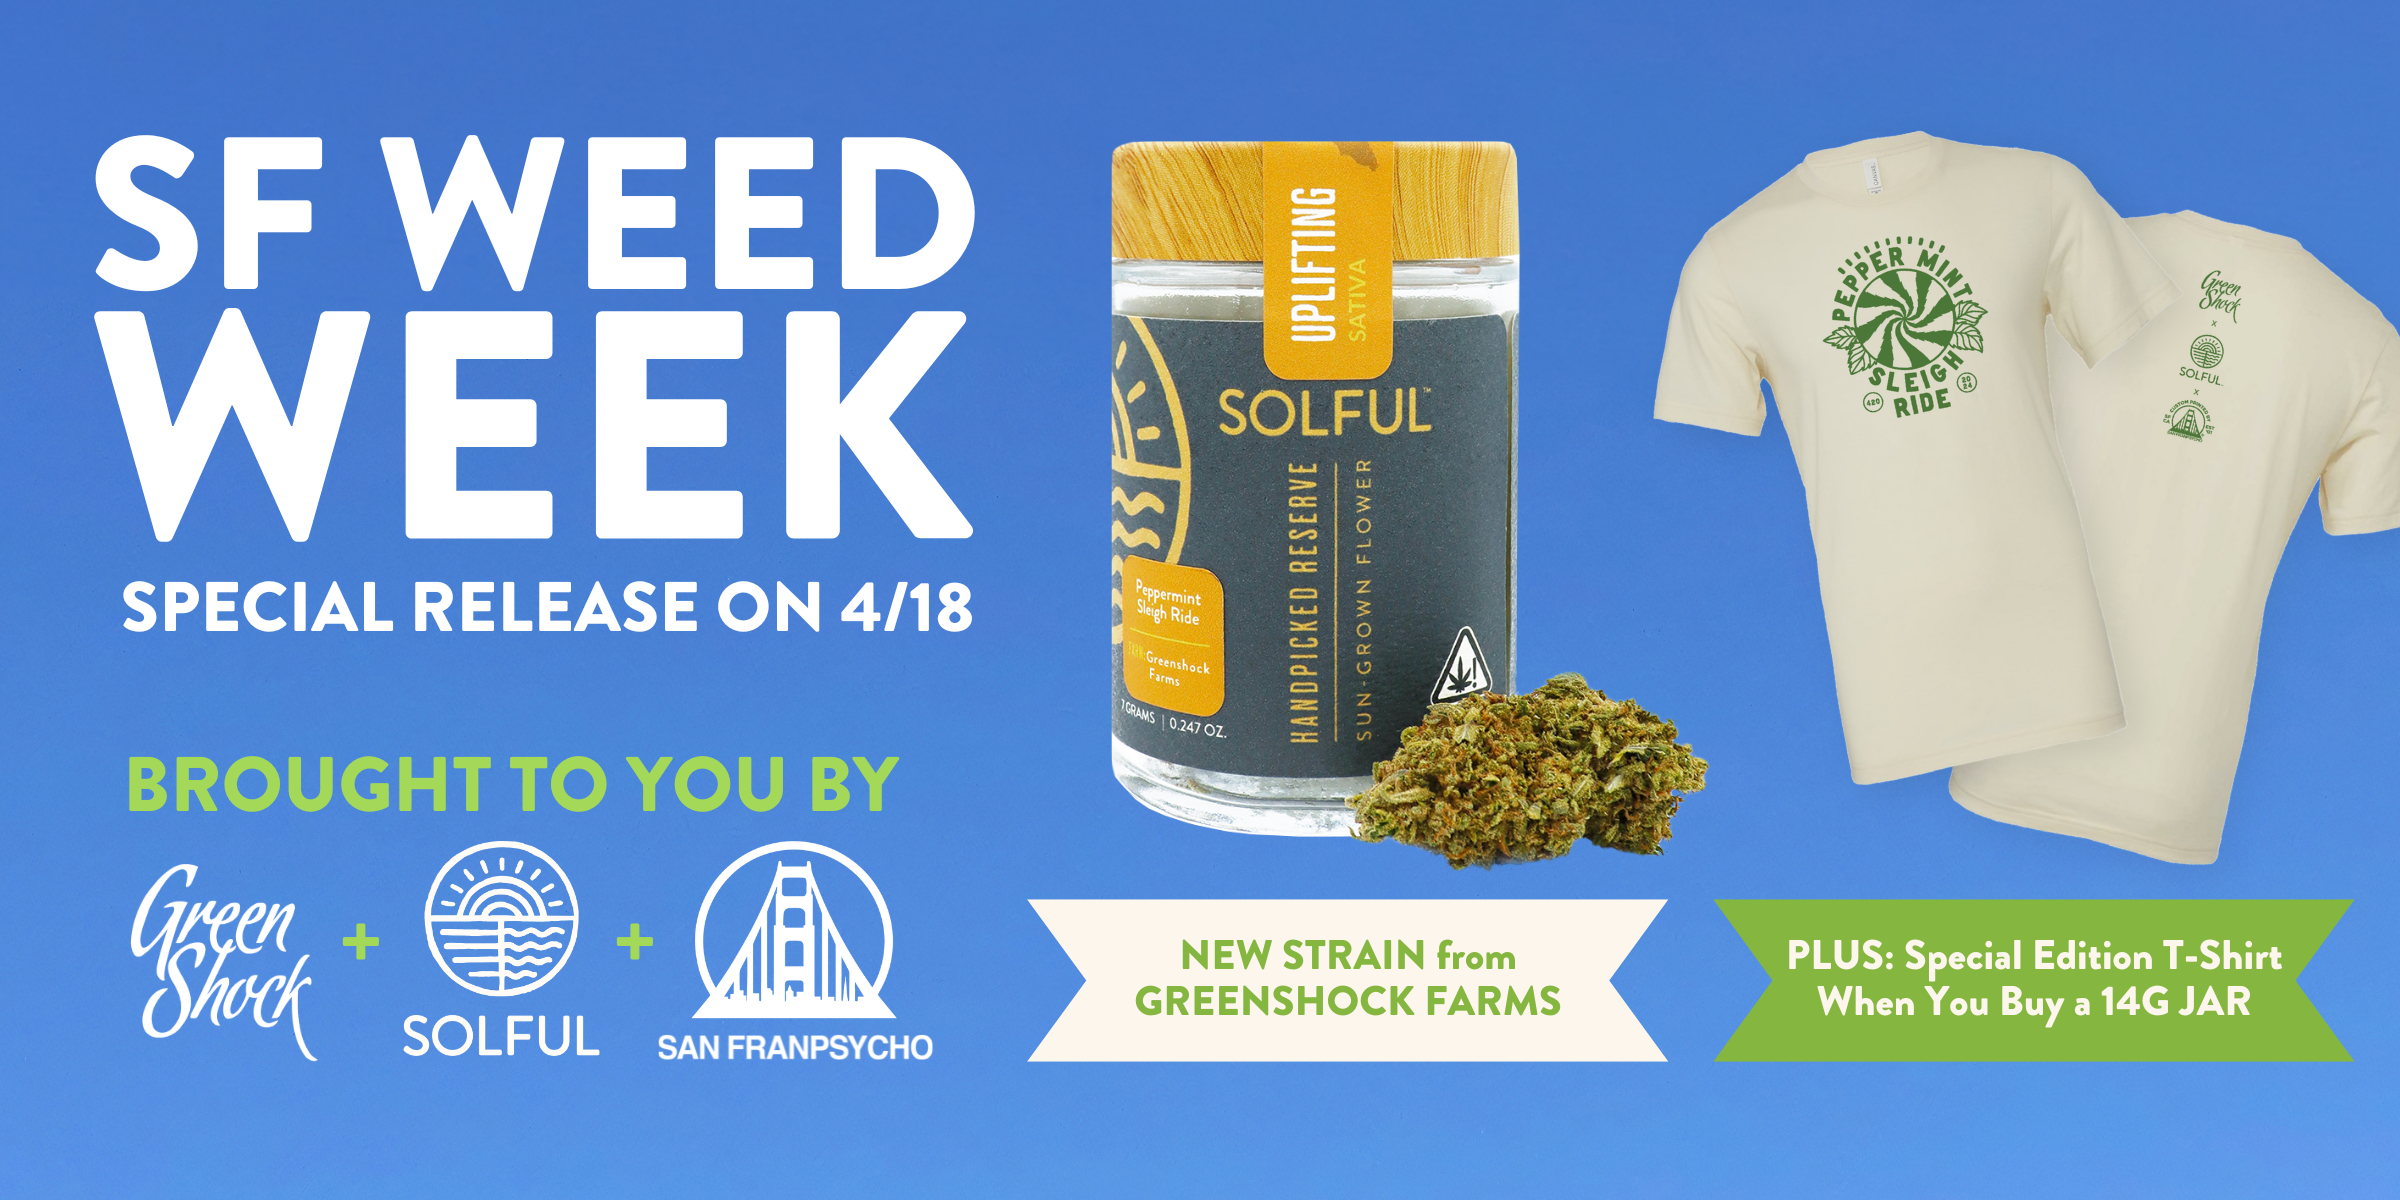 SF Weed Week Special Release on 4/18: Peppermint Sleigh Ride, a new strain from Greenshock Farms. Brought to you by Greenshock Farms, Solful, and San Franpsycho.